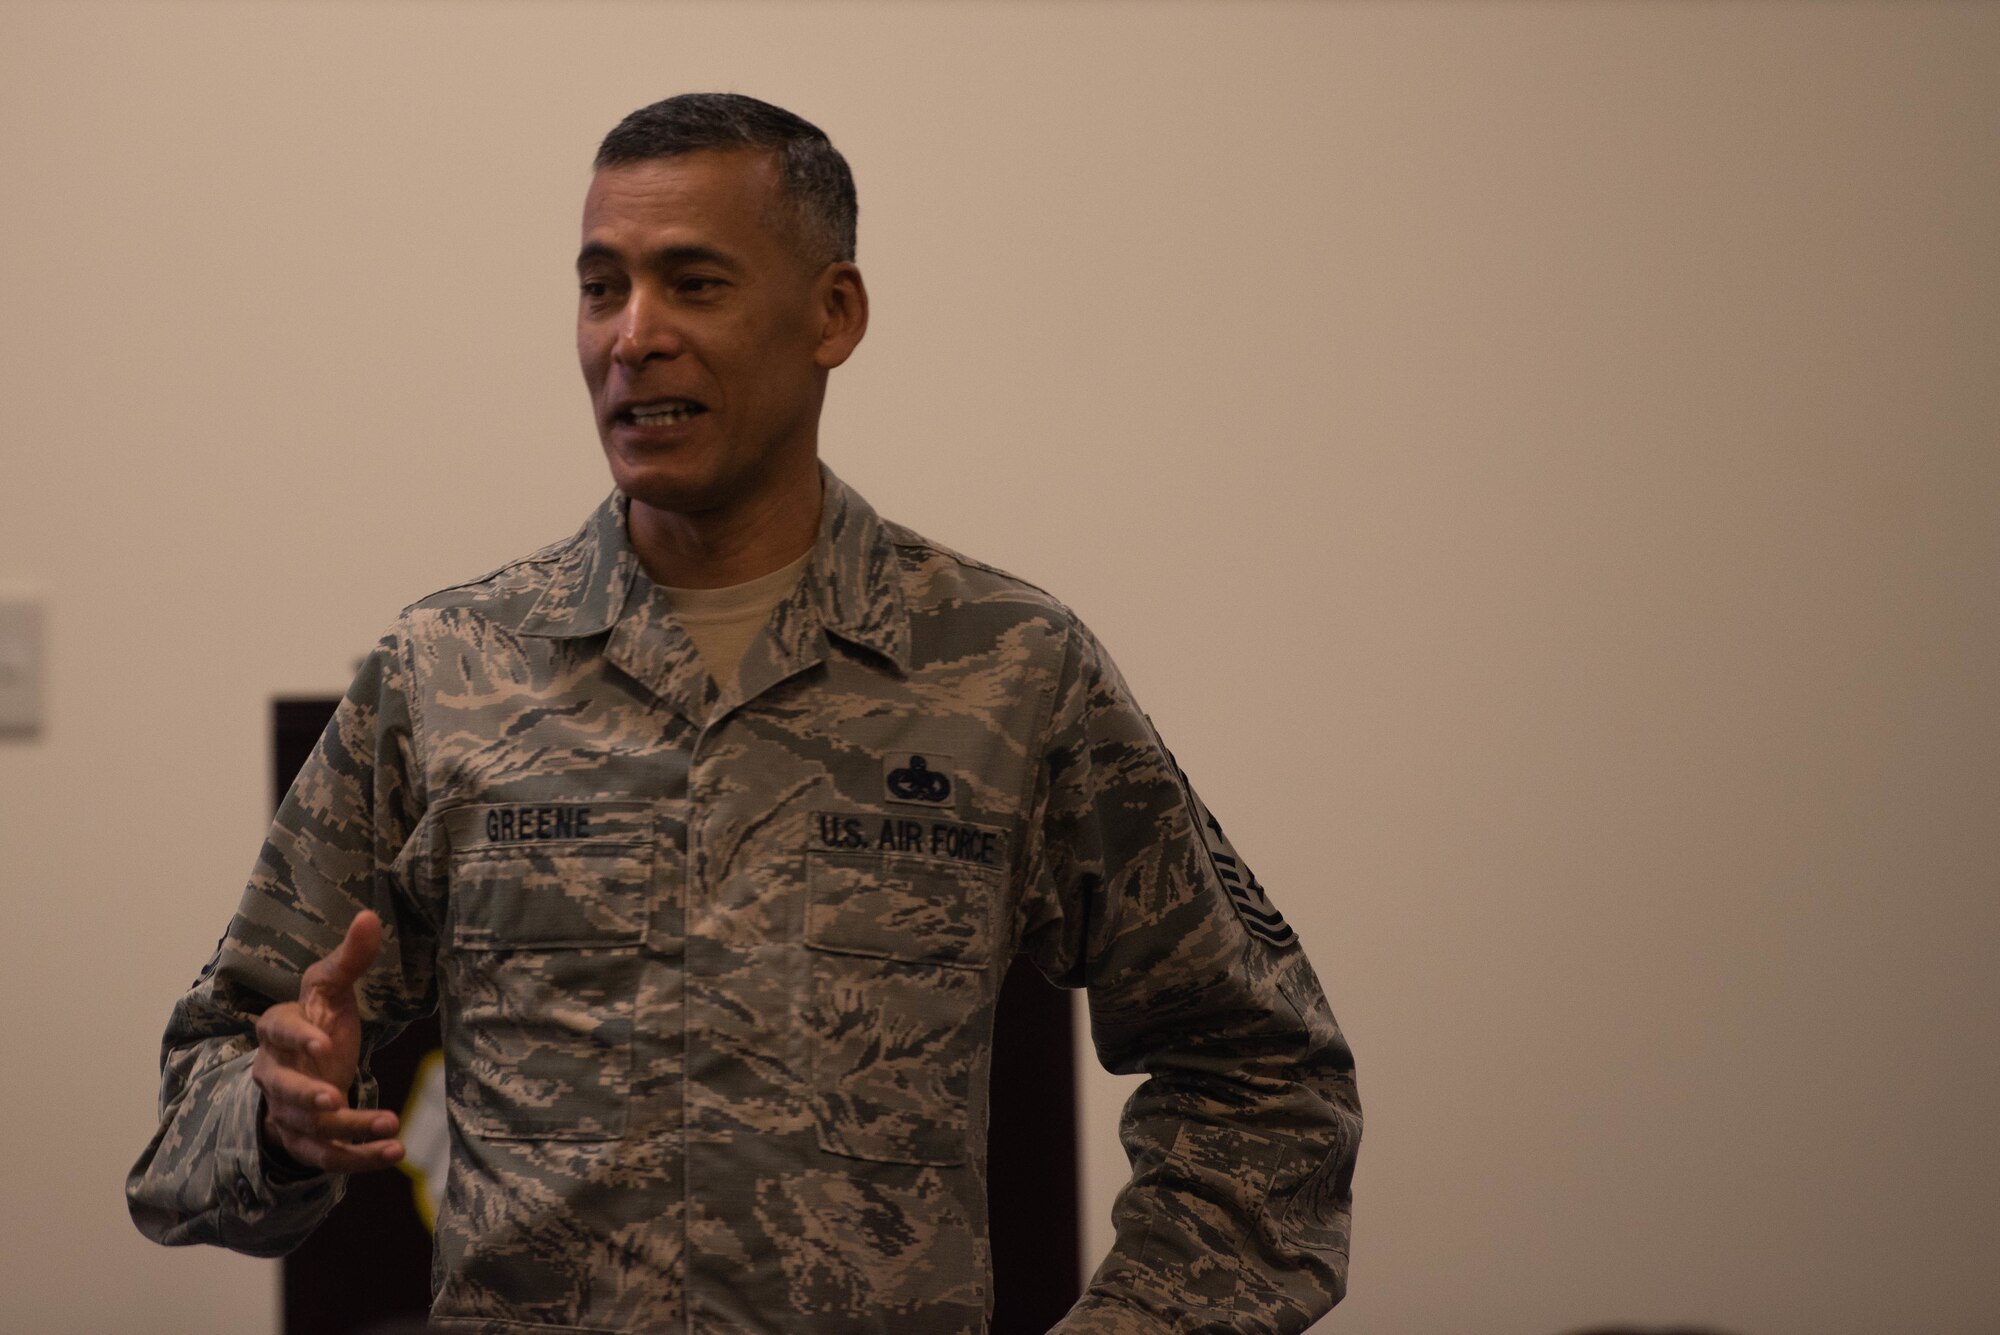 U.S. Chief Master Sgt. Terrance Greene, U.S. Forces Japan command chief, speaks during the Okinawa Joint Experience Sept. 25, 2018, at Kadena Air Base, Japan. OJE was a three-day course aimed at improving relationships and familiarizing service members, from different branches of service, with each other. (U.S. Air Force photo by Senior Airman Kristan Campbell)